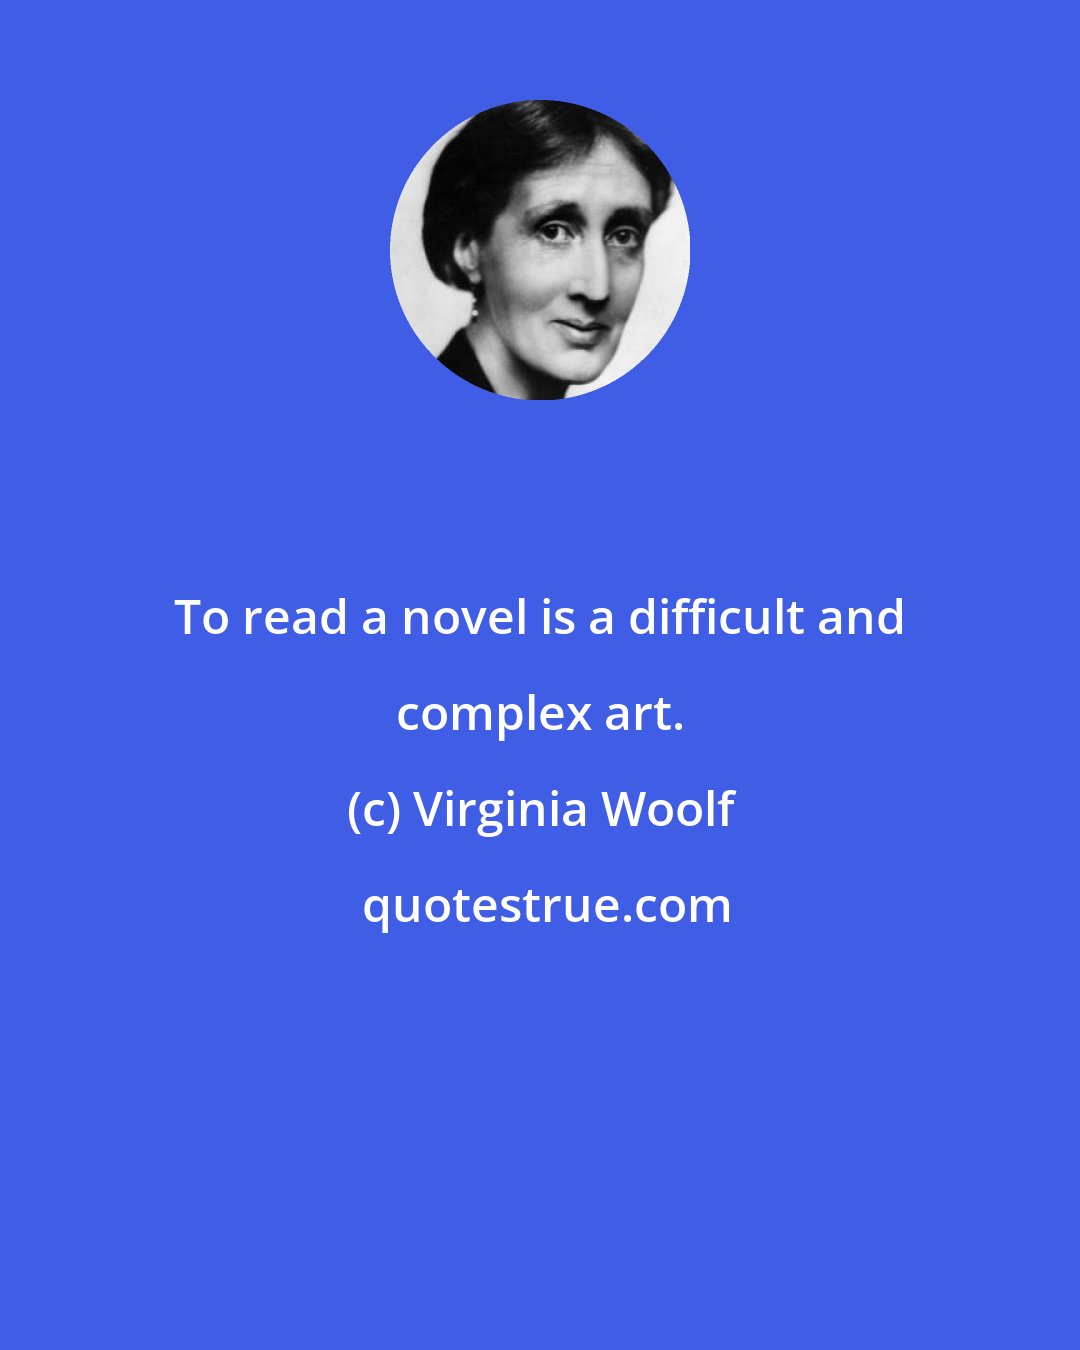 Virginia Woolf: To read a novel is a difficult and complex art.